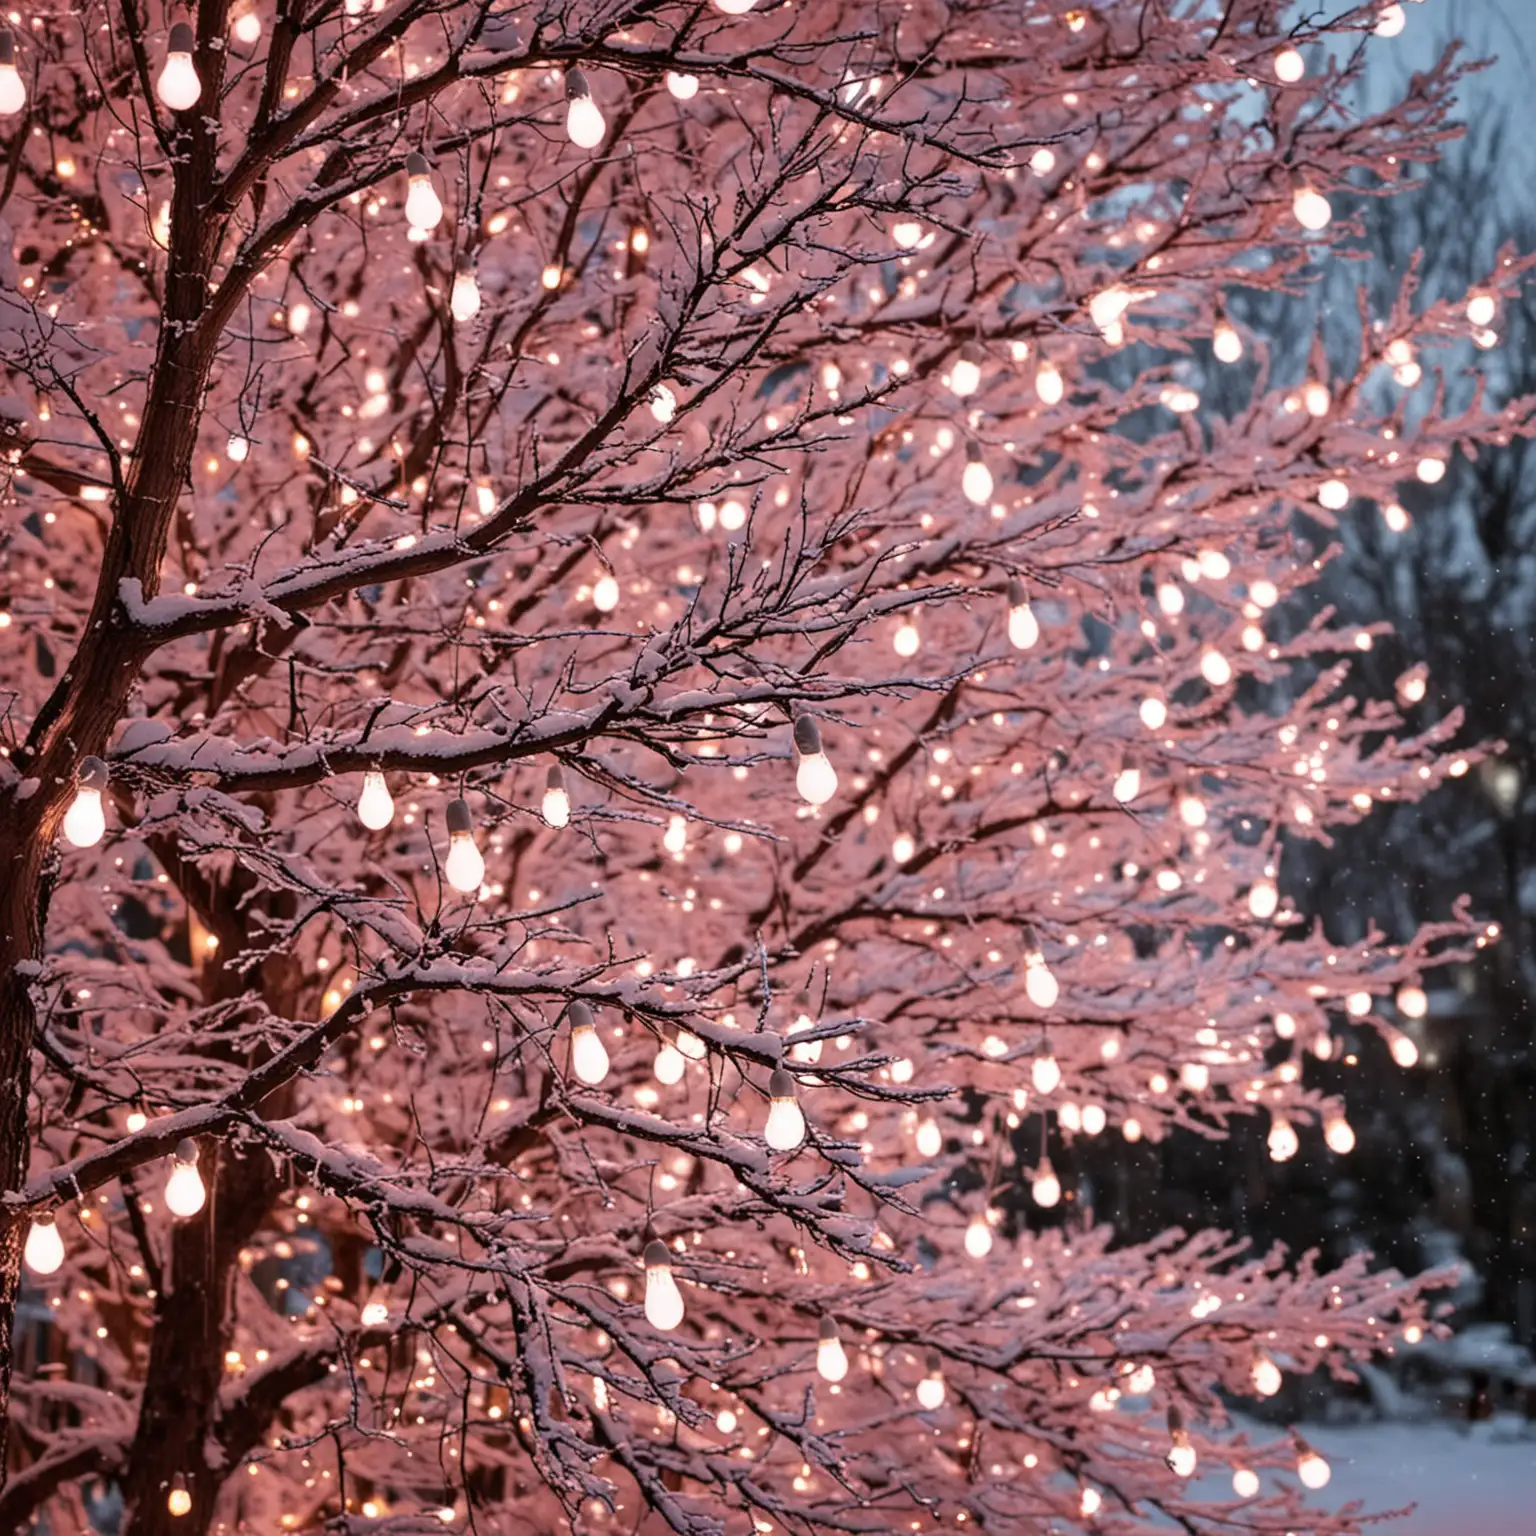 Snowy Christmas Tree with Pink and White Lights CloseUp